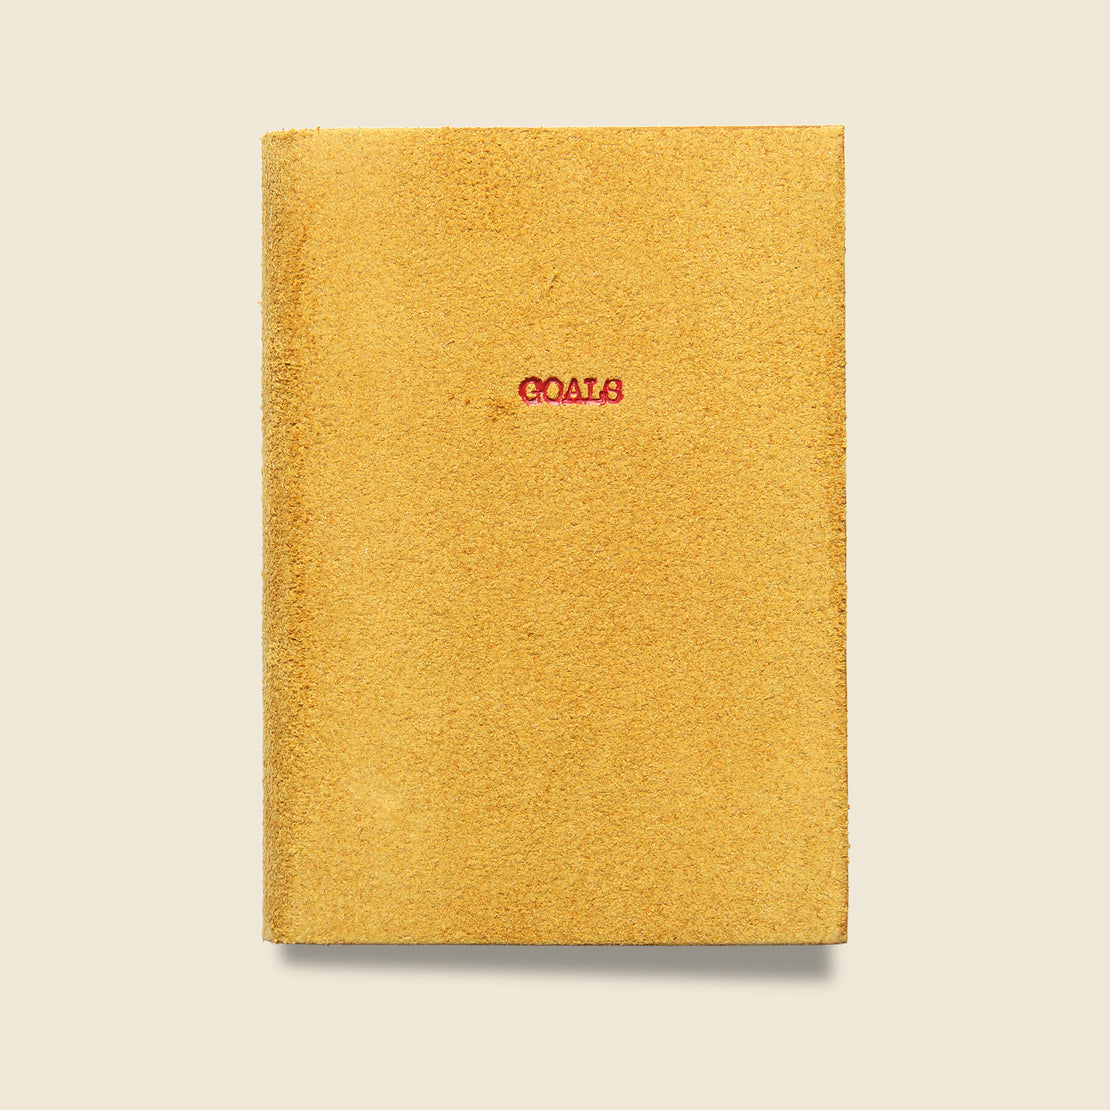 Paper Goods "GOALS" Leather Journal - Yellow